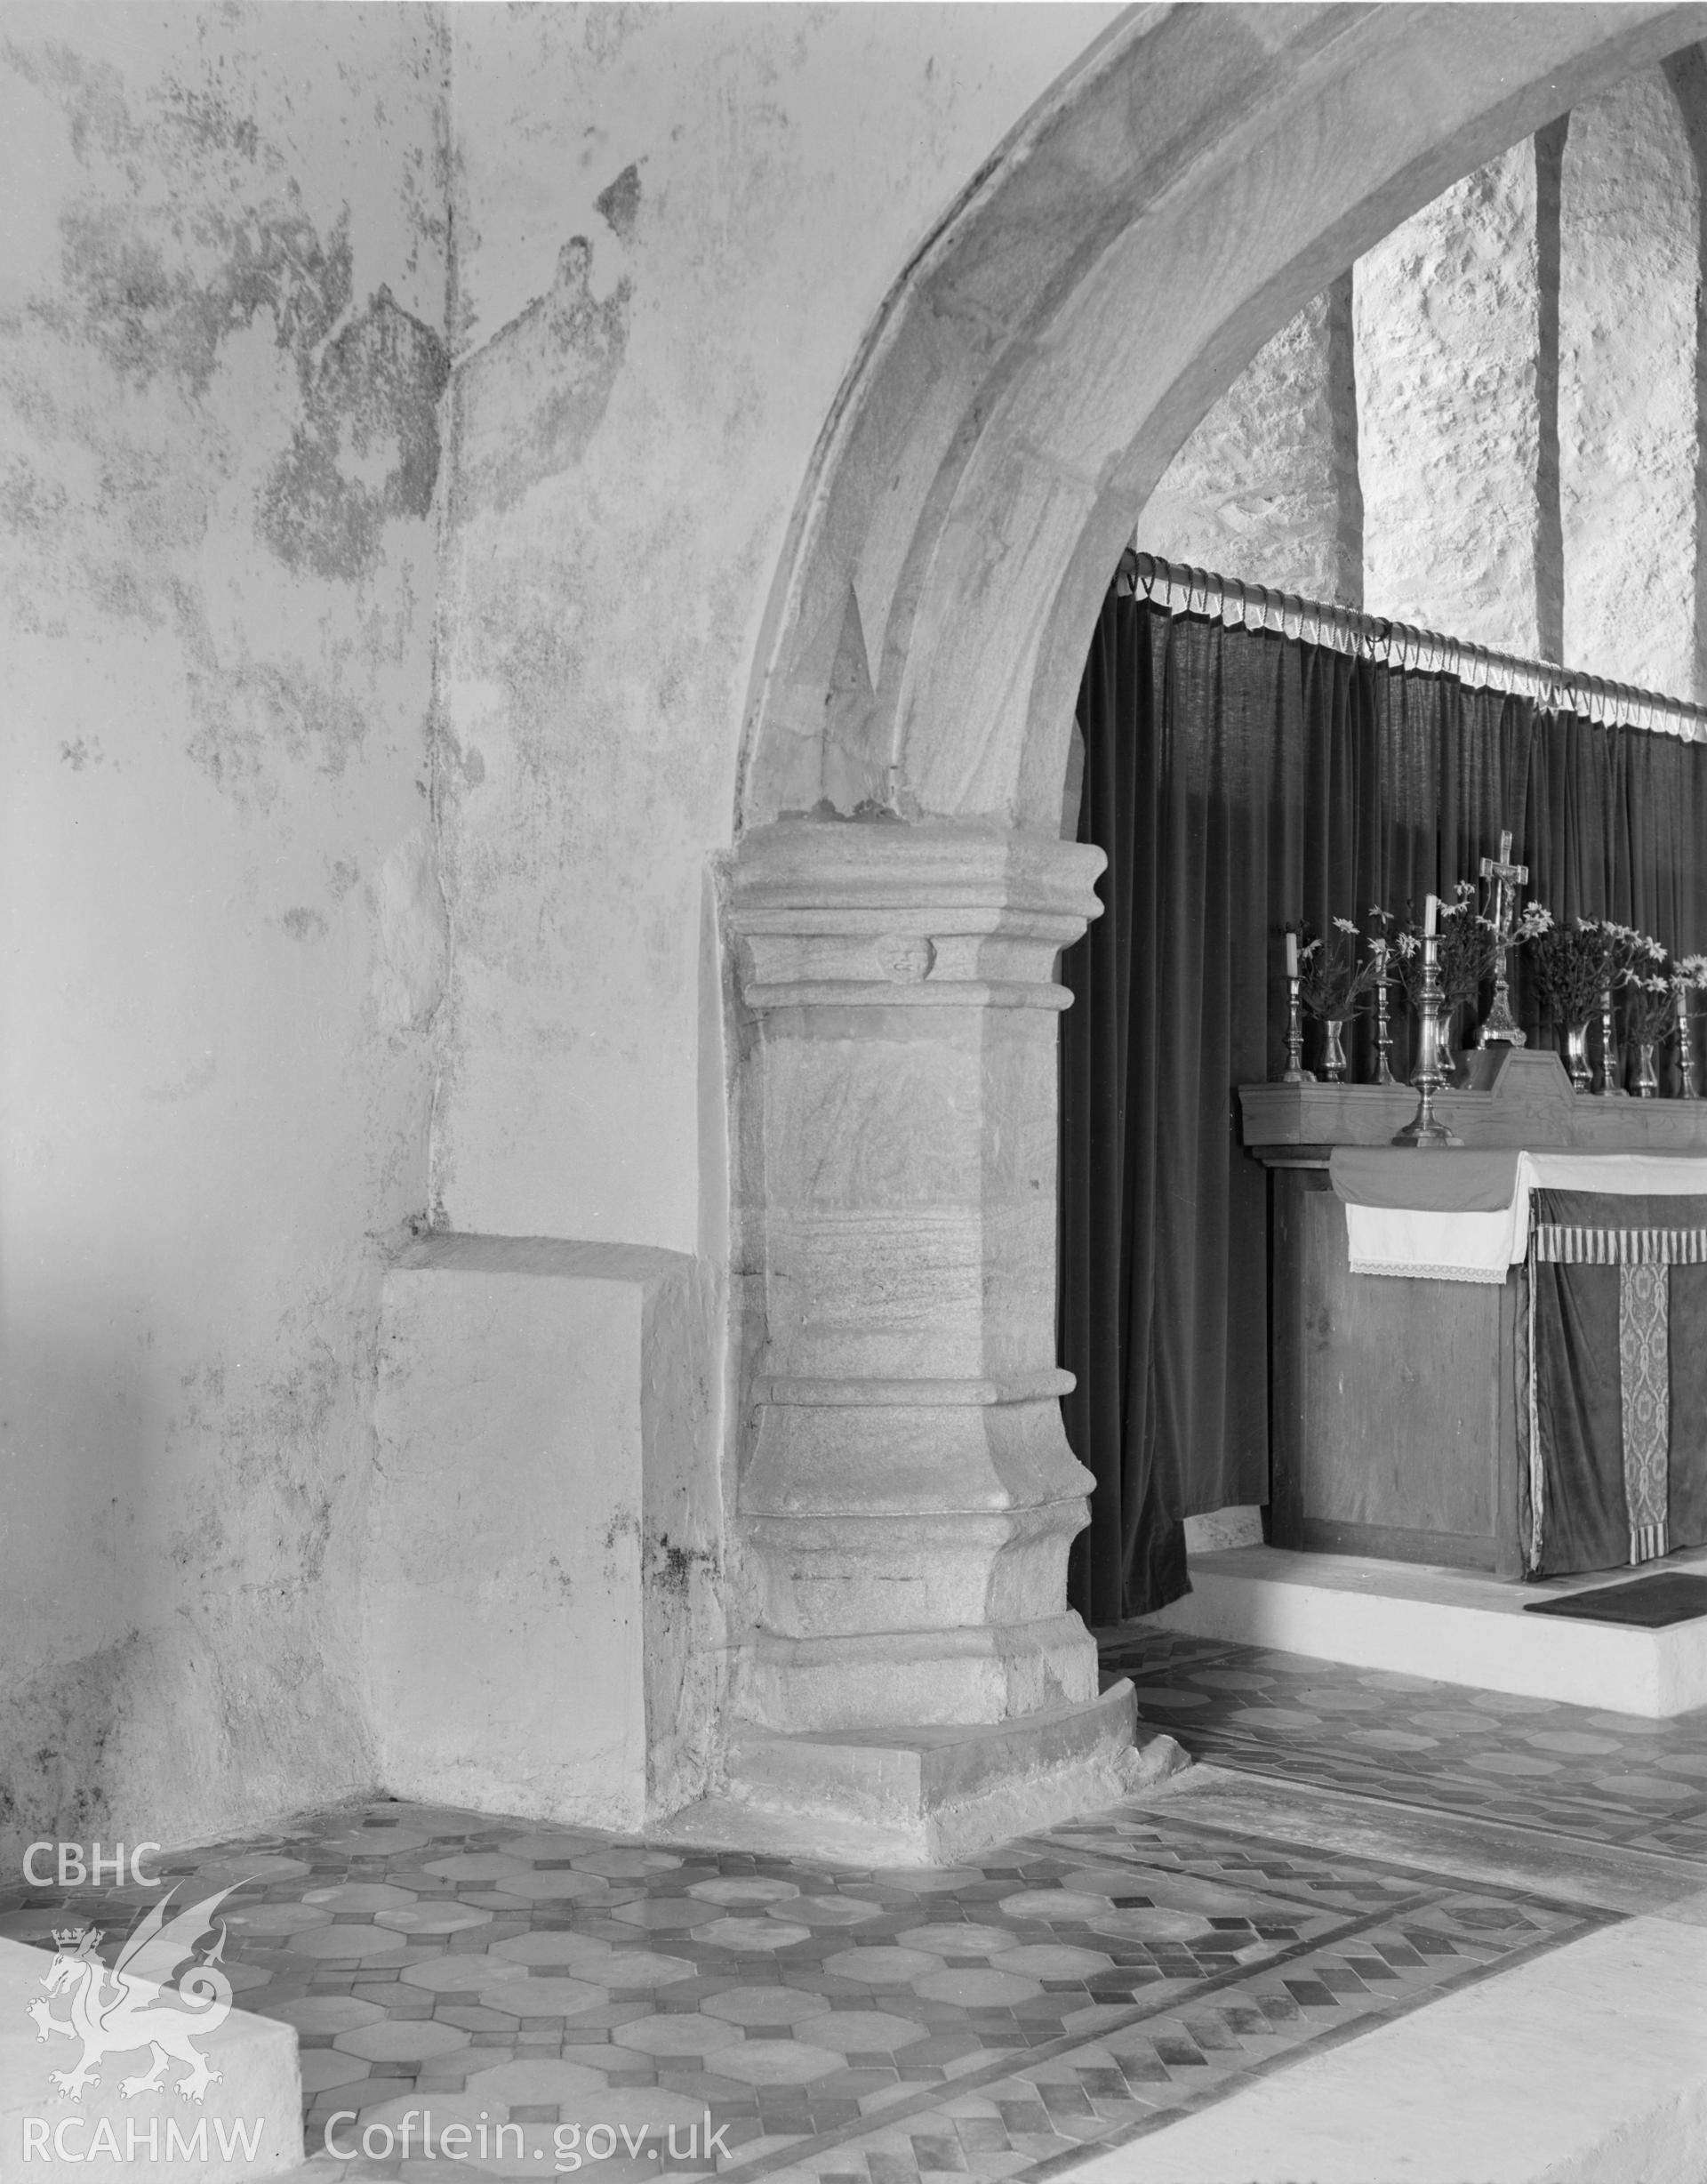 Black and white nitrate negative showing interior view of Llaniestyn Church.